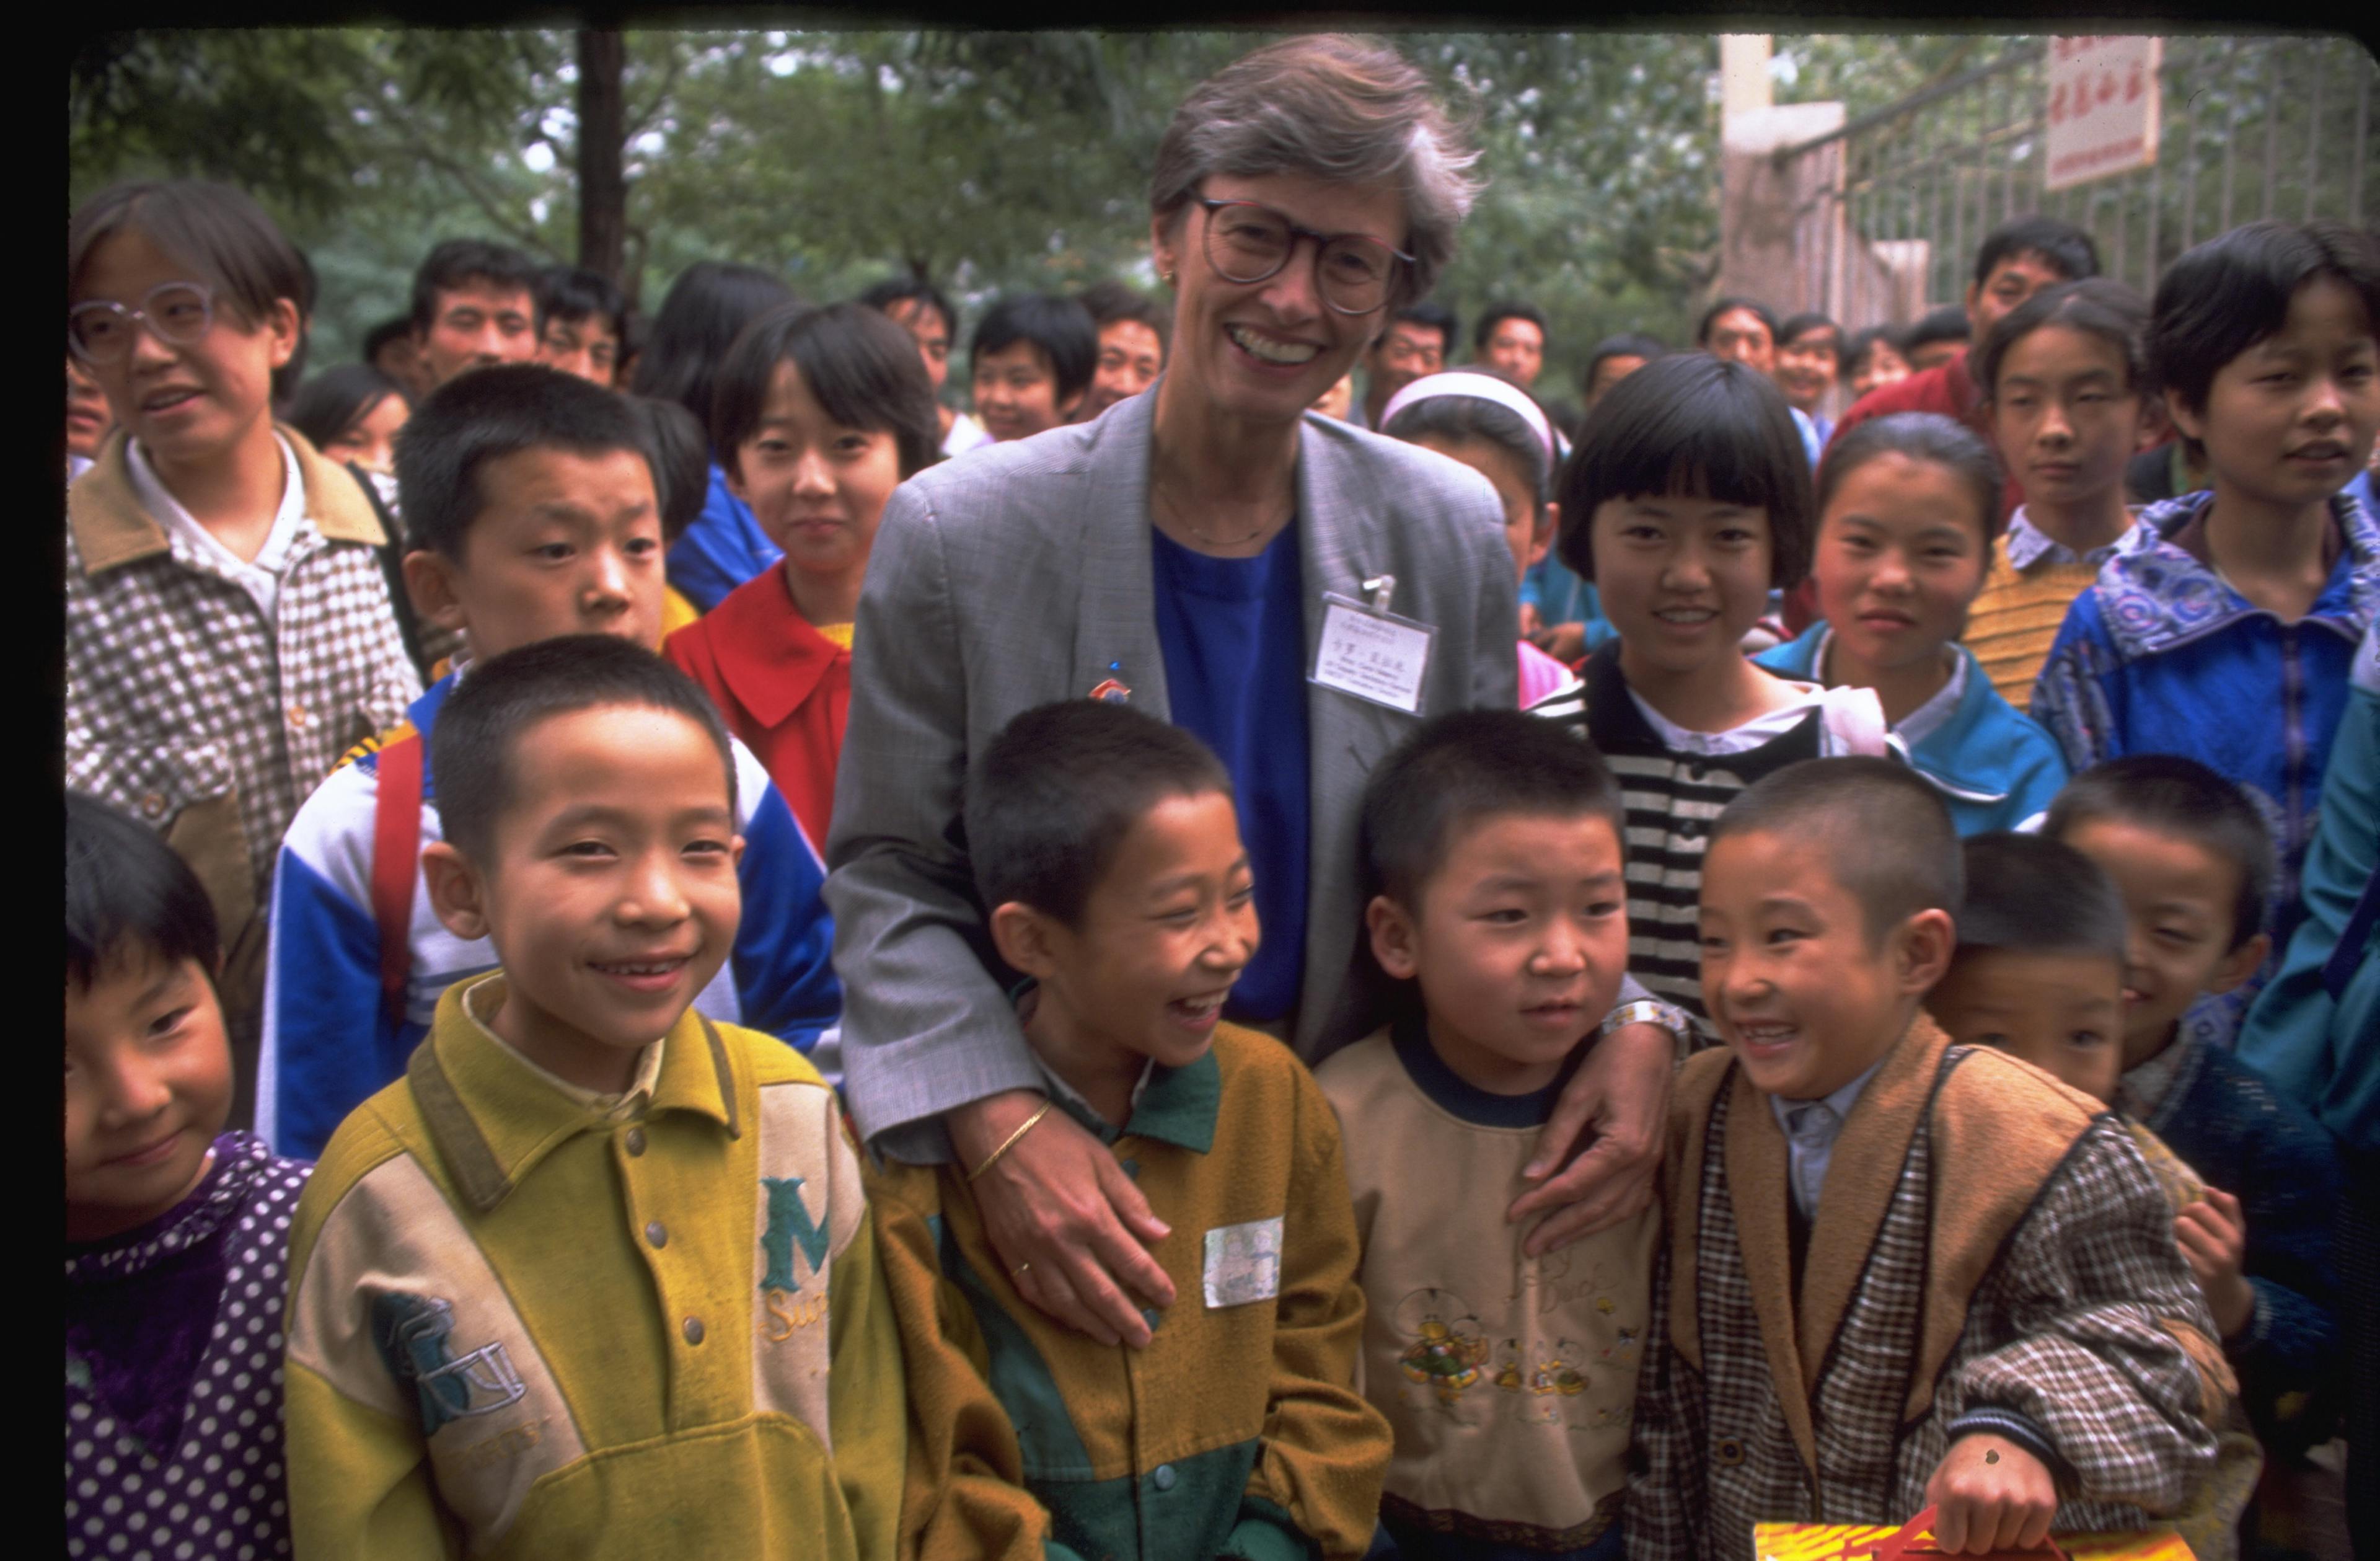 UNICEF Executive Director Carol Bellamy visits with children in the village of Bai Yin. While in the country, Ms. Bellamy also attended the Fourth World Conference on Women, held in Beijing, China.